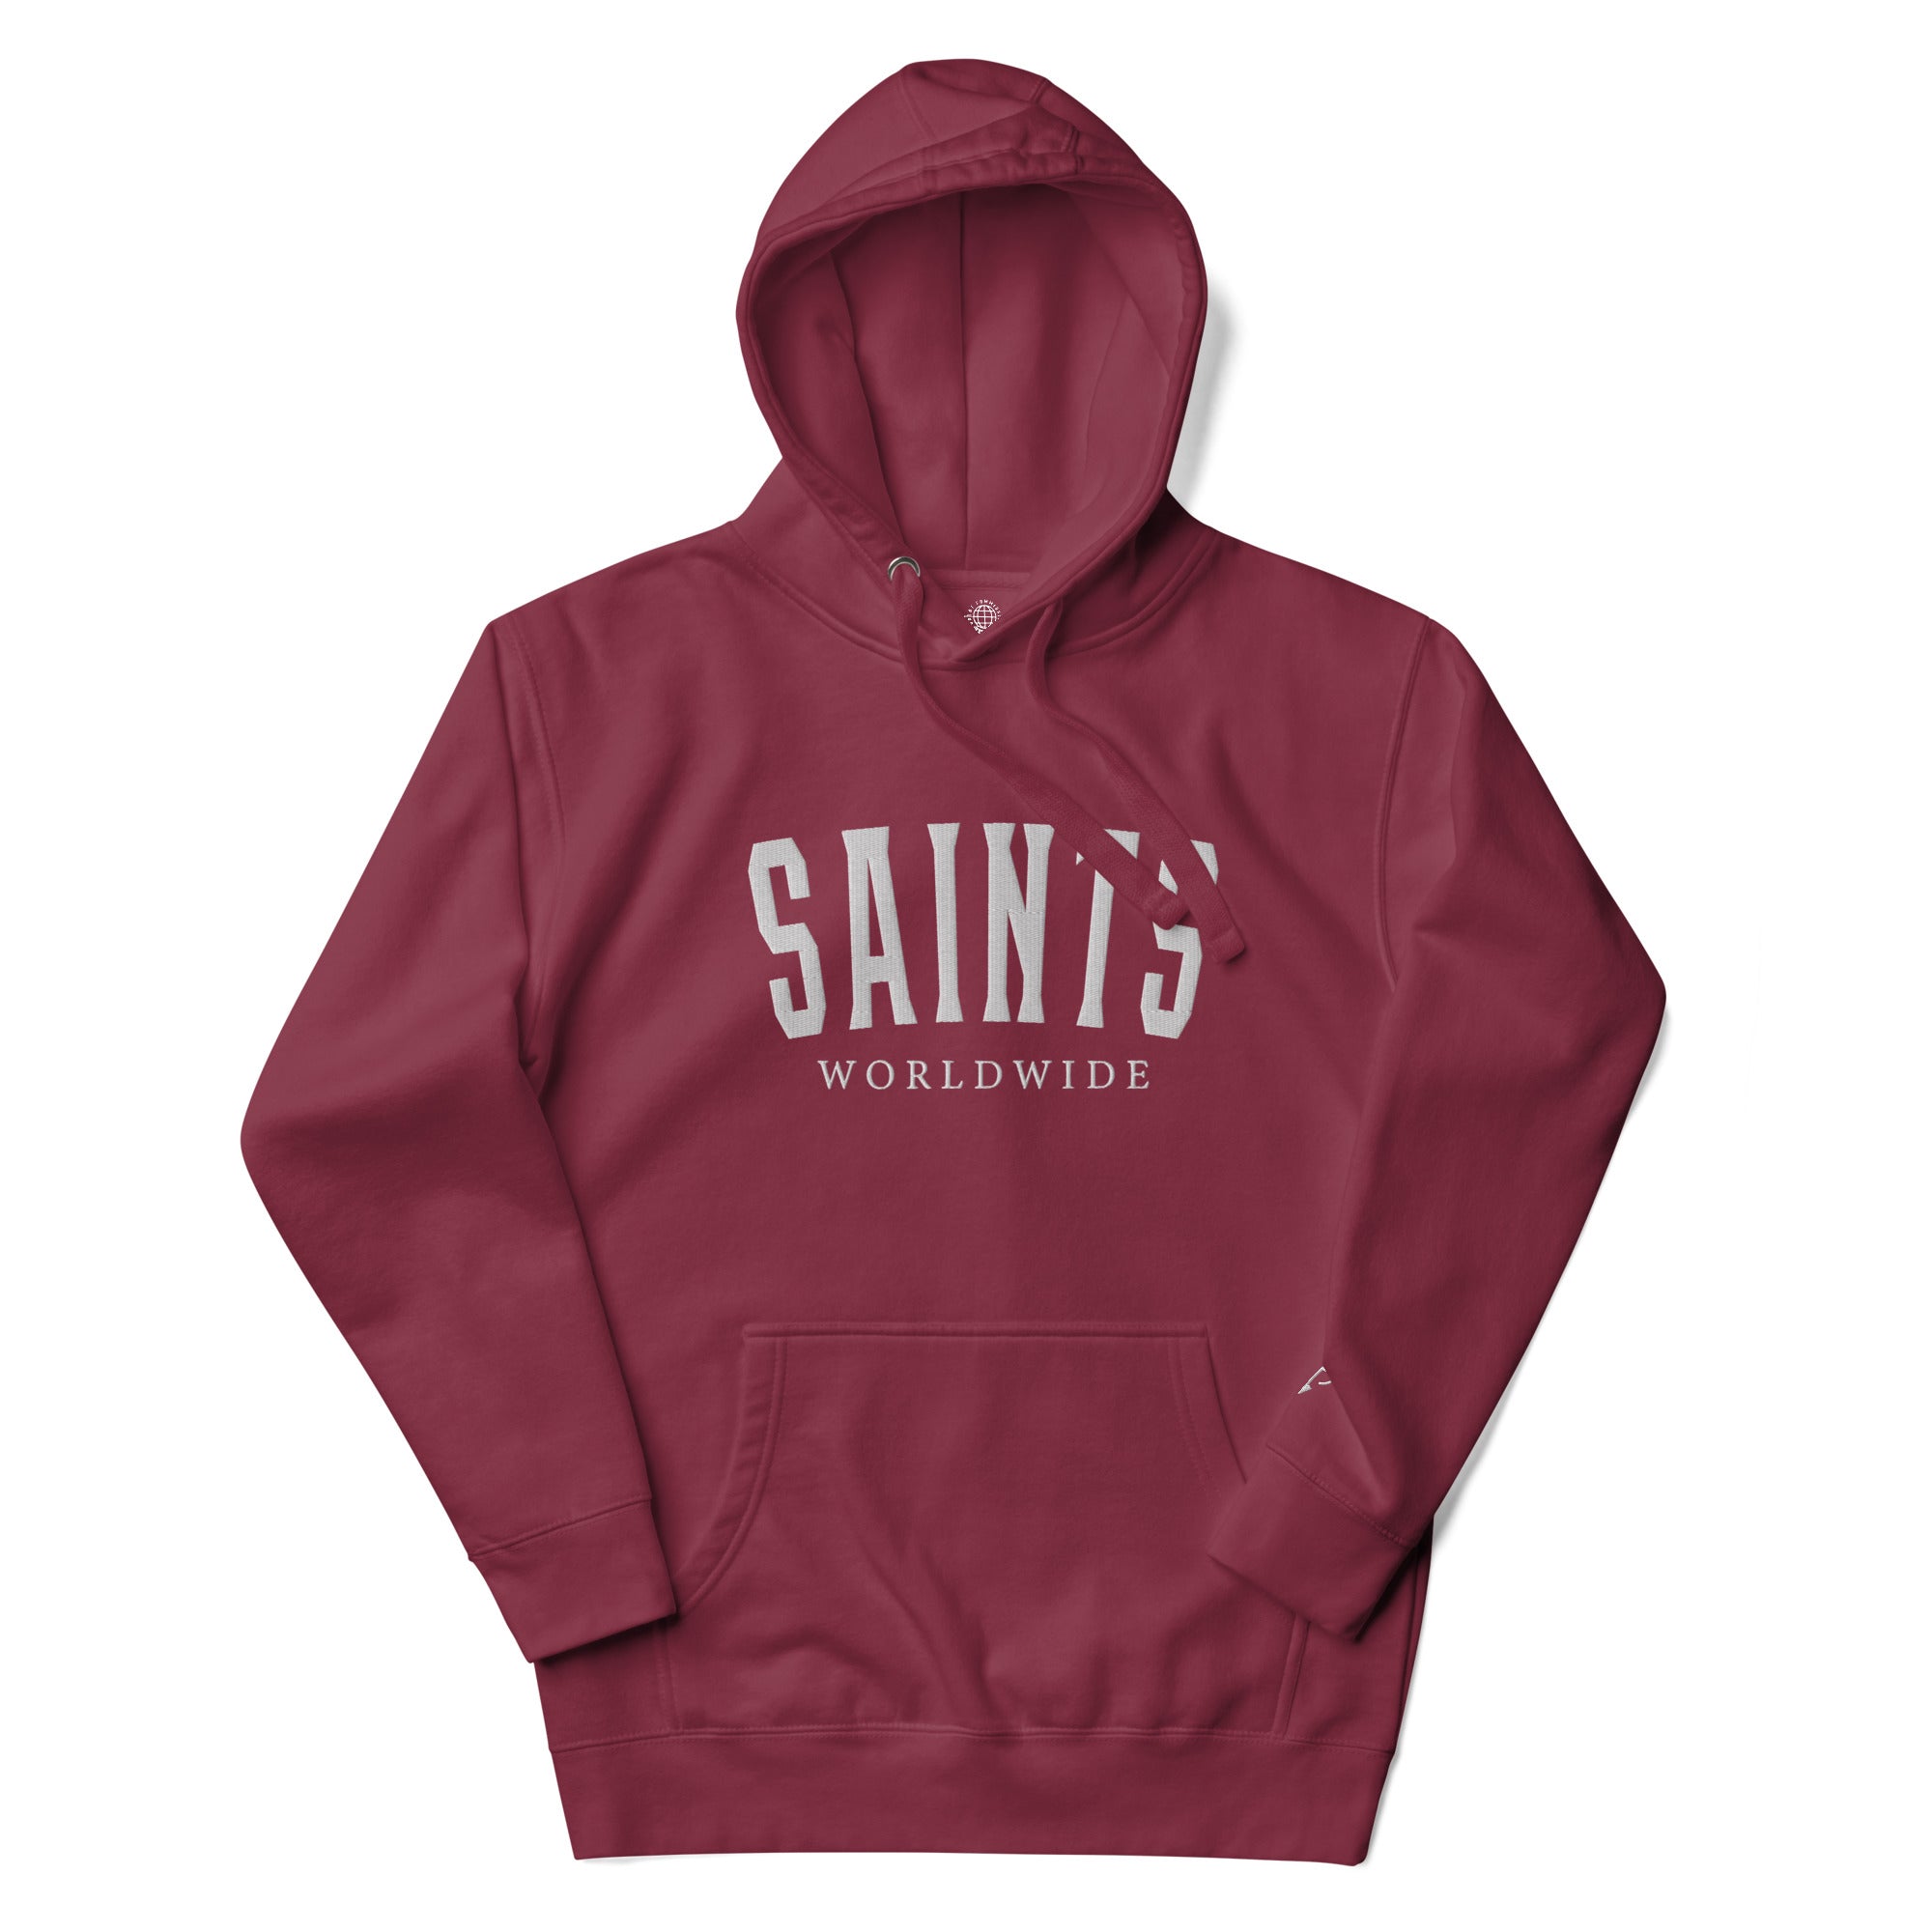 SAINTS WORLDWIDE Embroidered Hoodie - Maroon - Great Commission Company